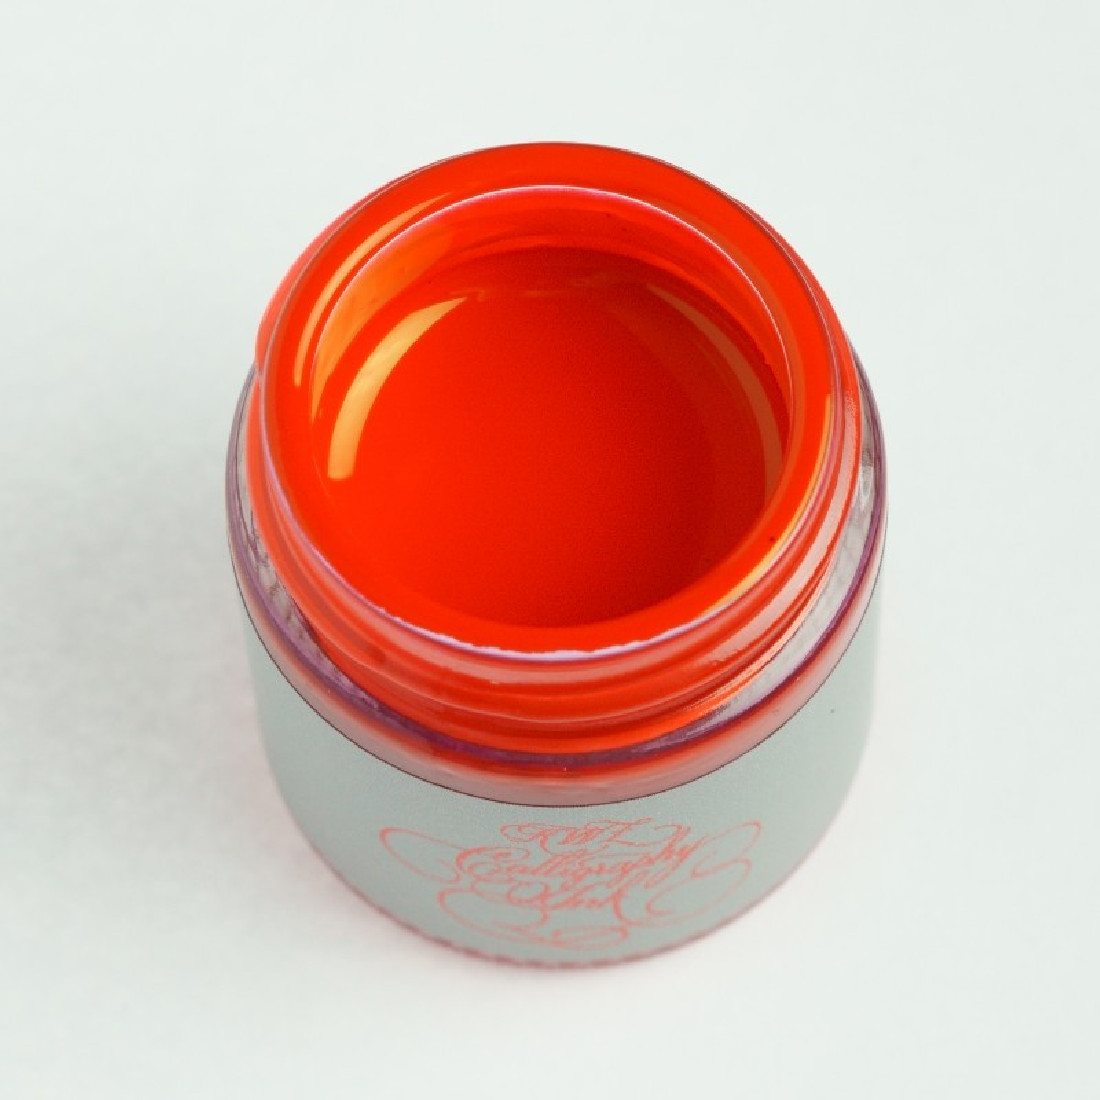 KWZ Calligraphy ink 5403 25g Red for dip pens